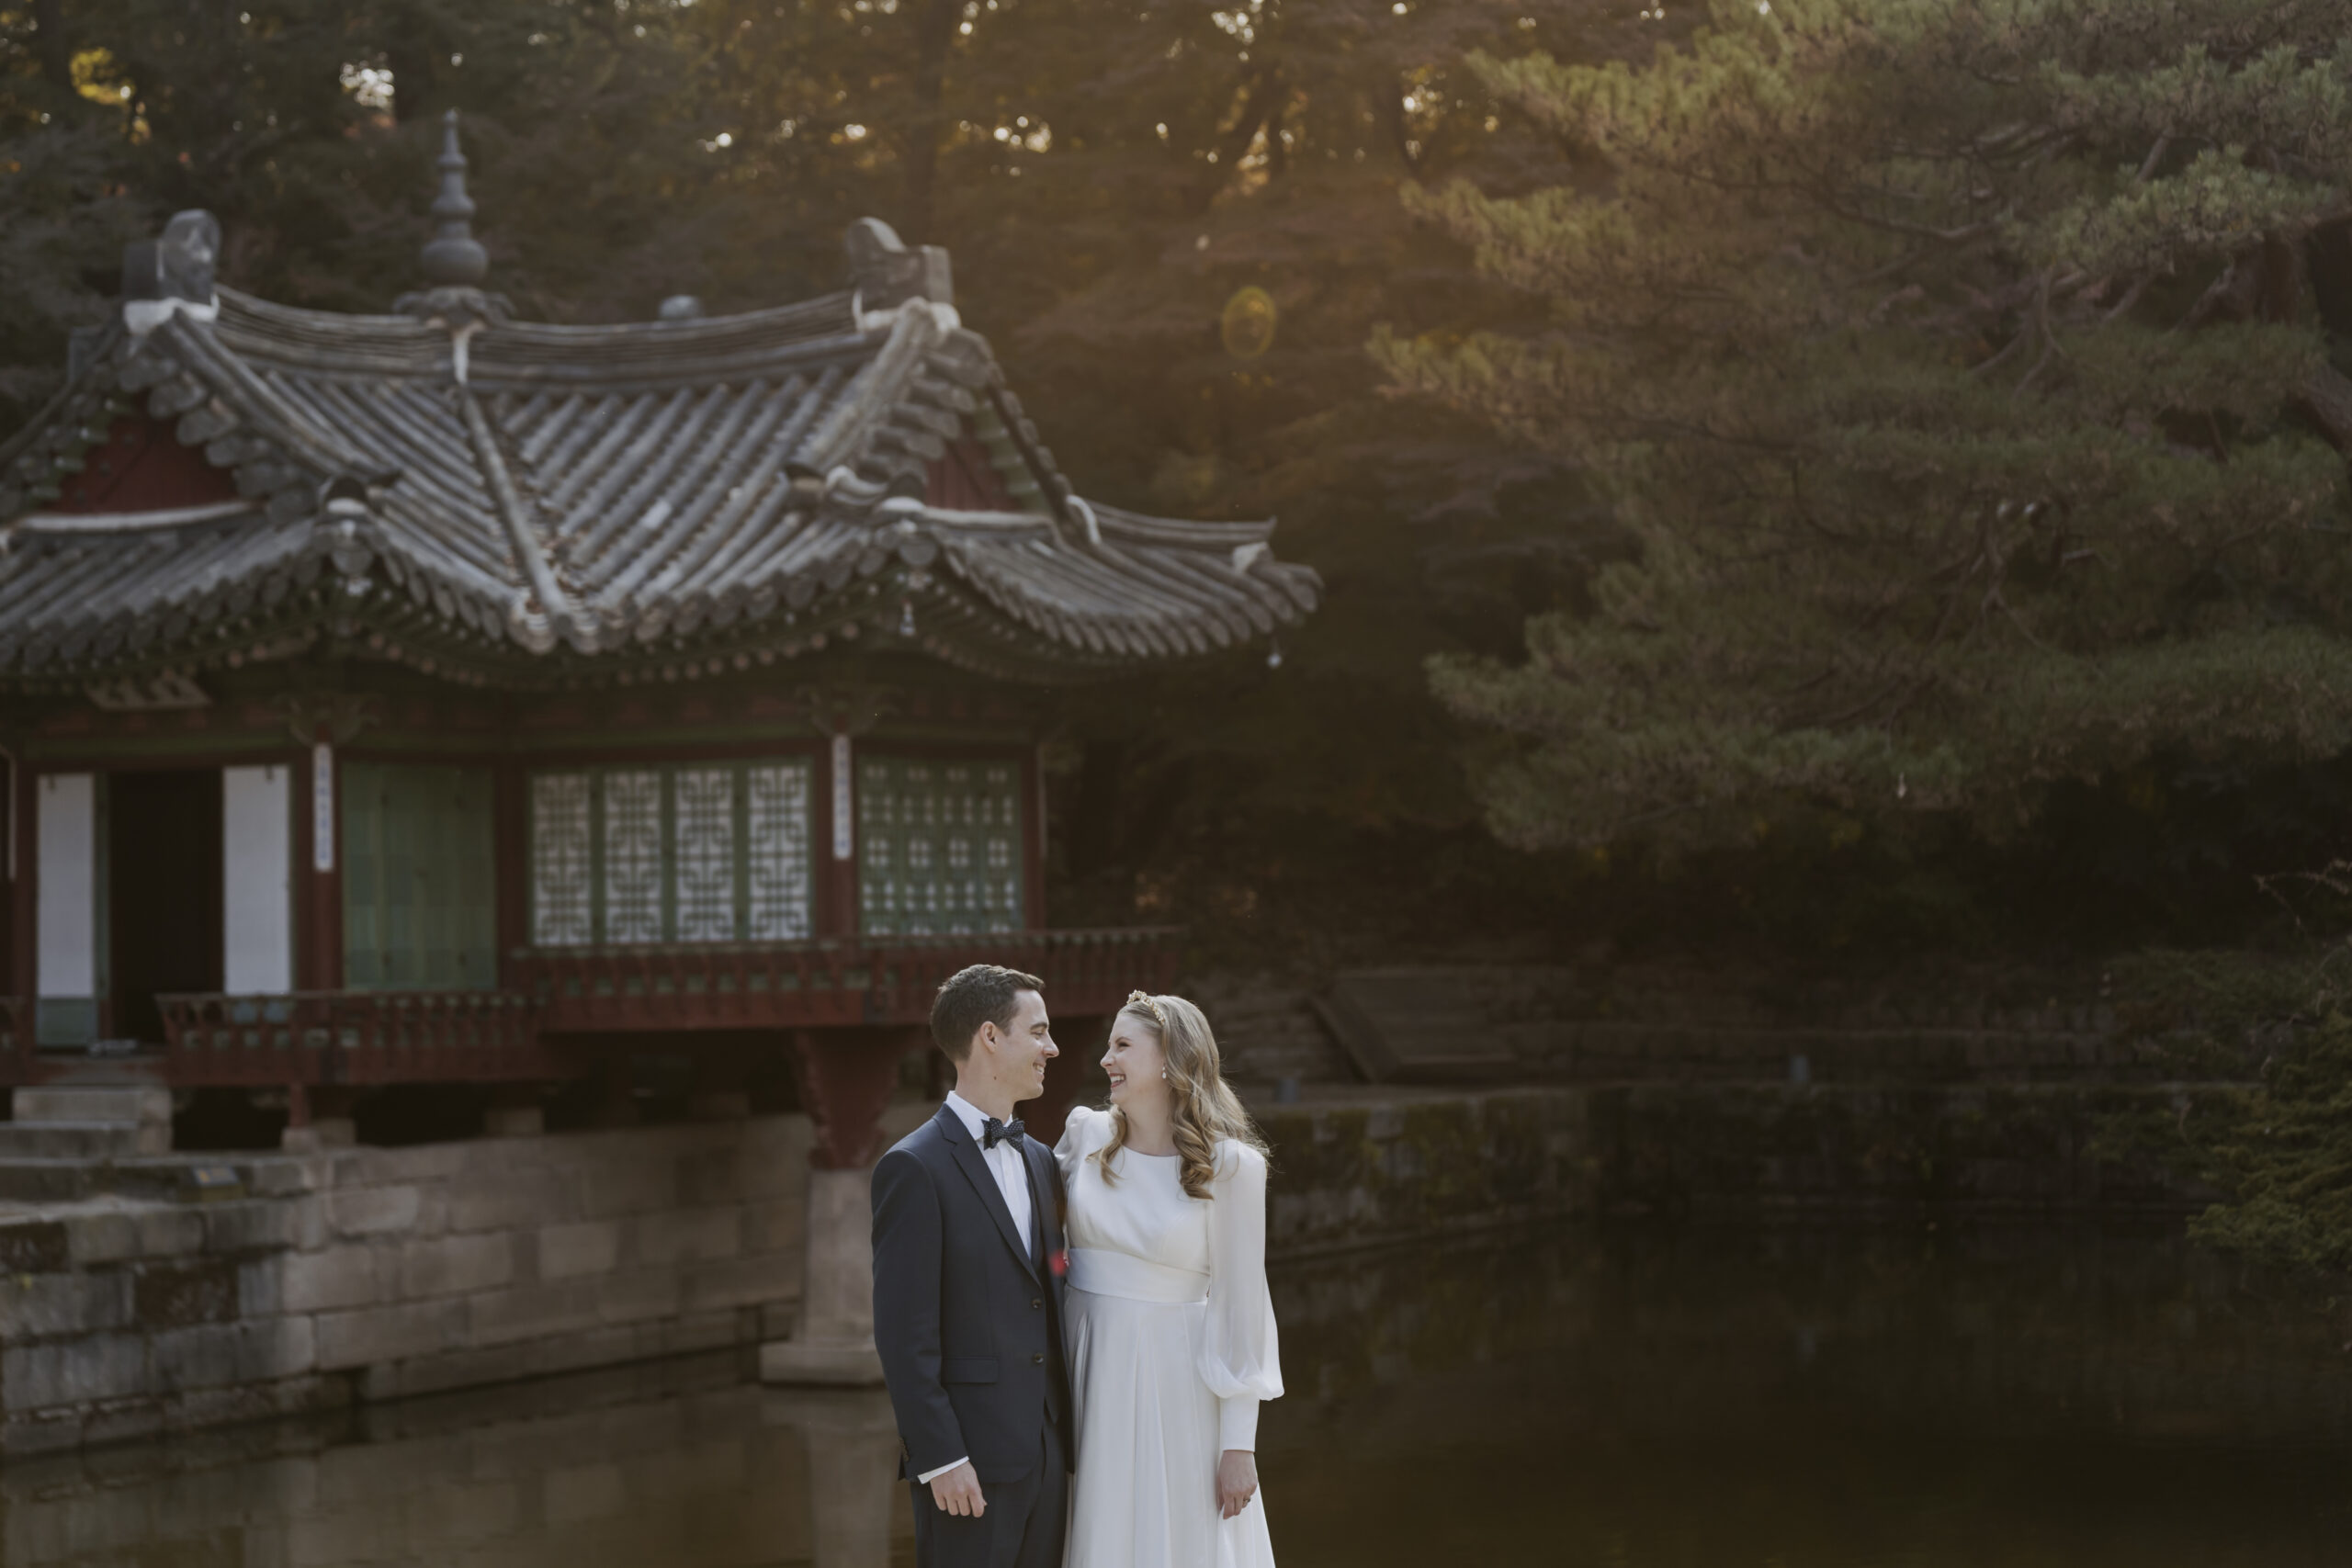 A bride and groom standing in the secret garden in Changdeokgung Palace.